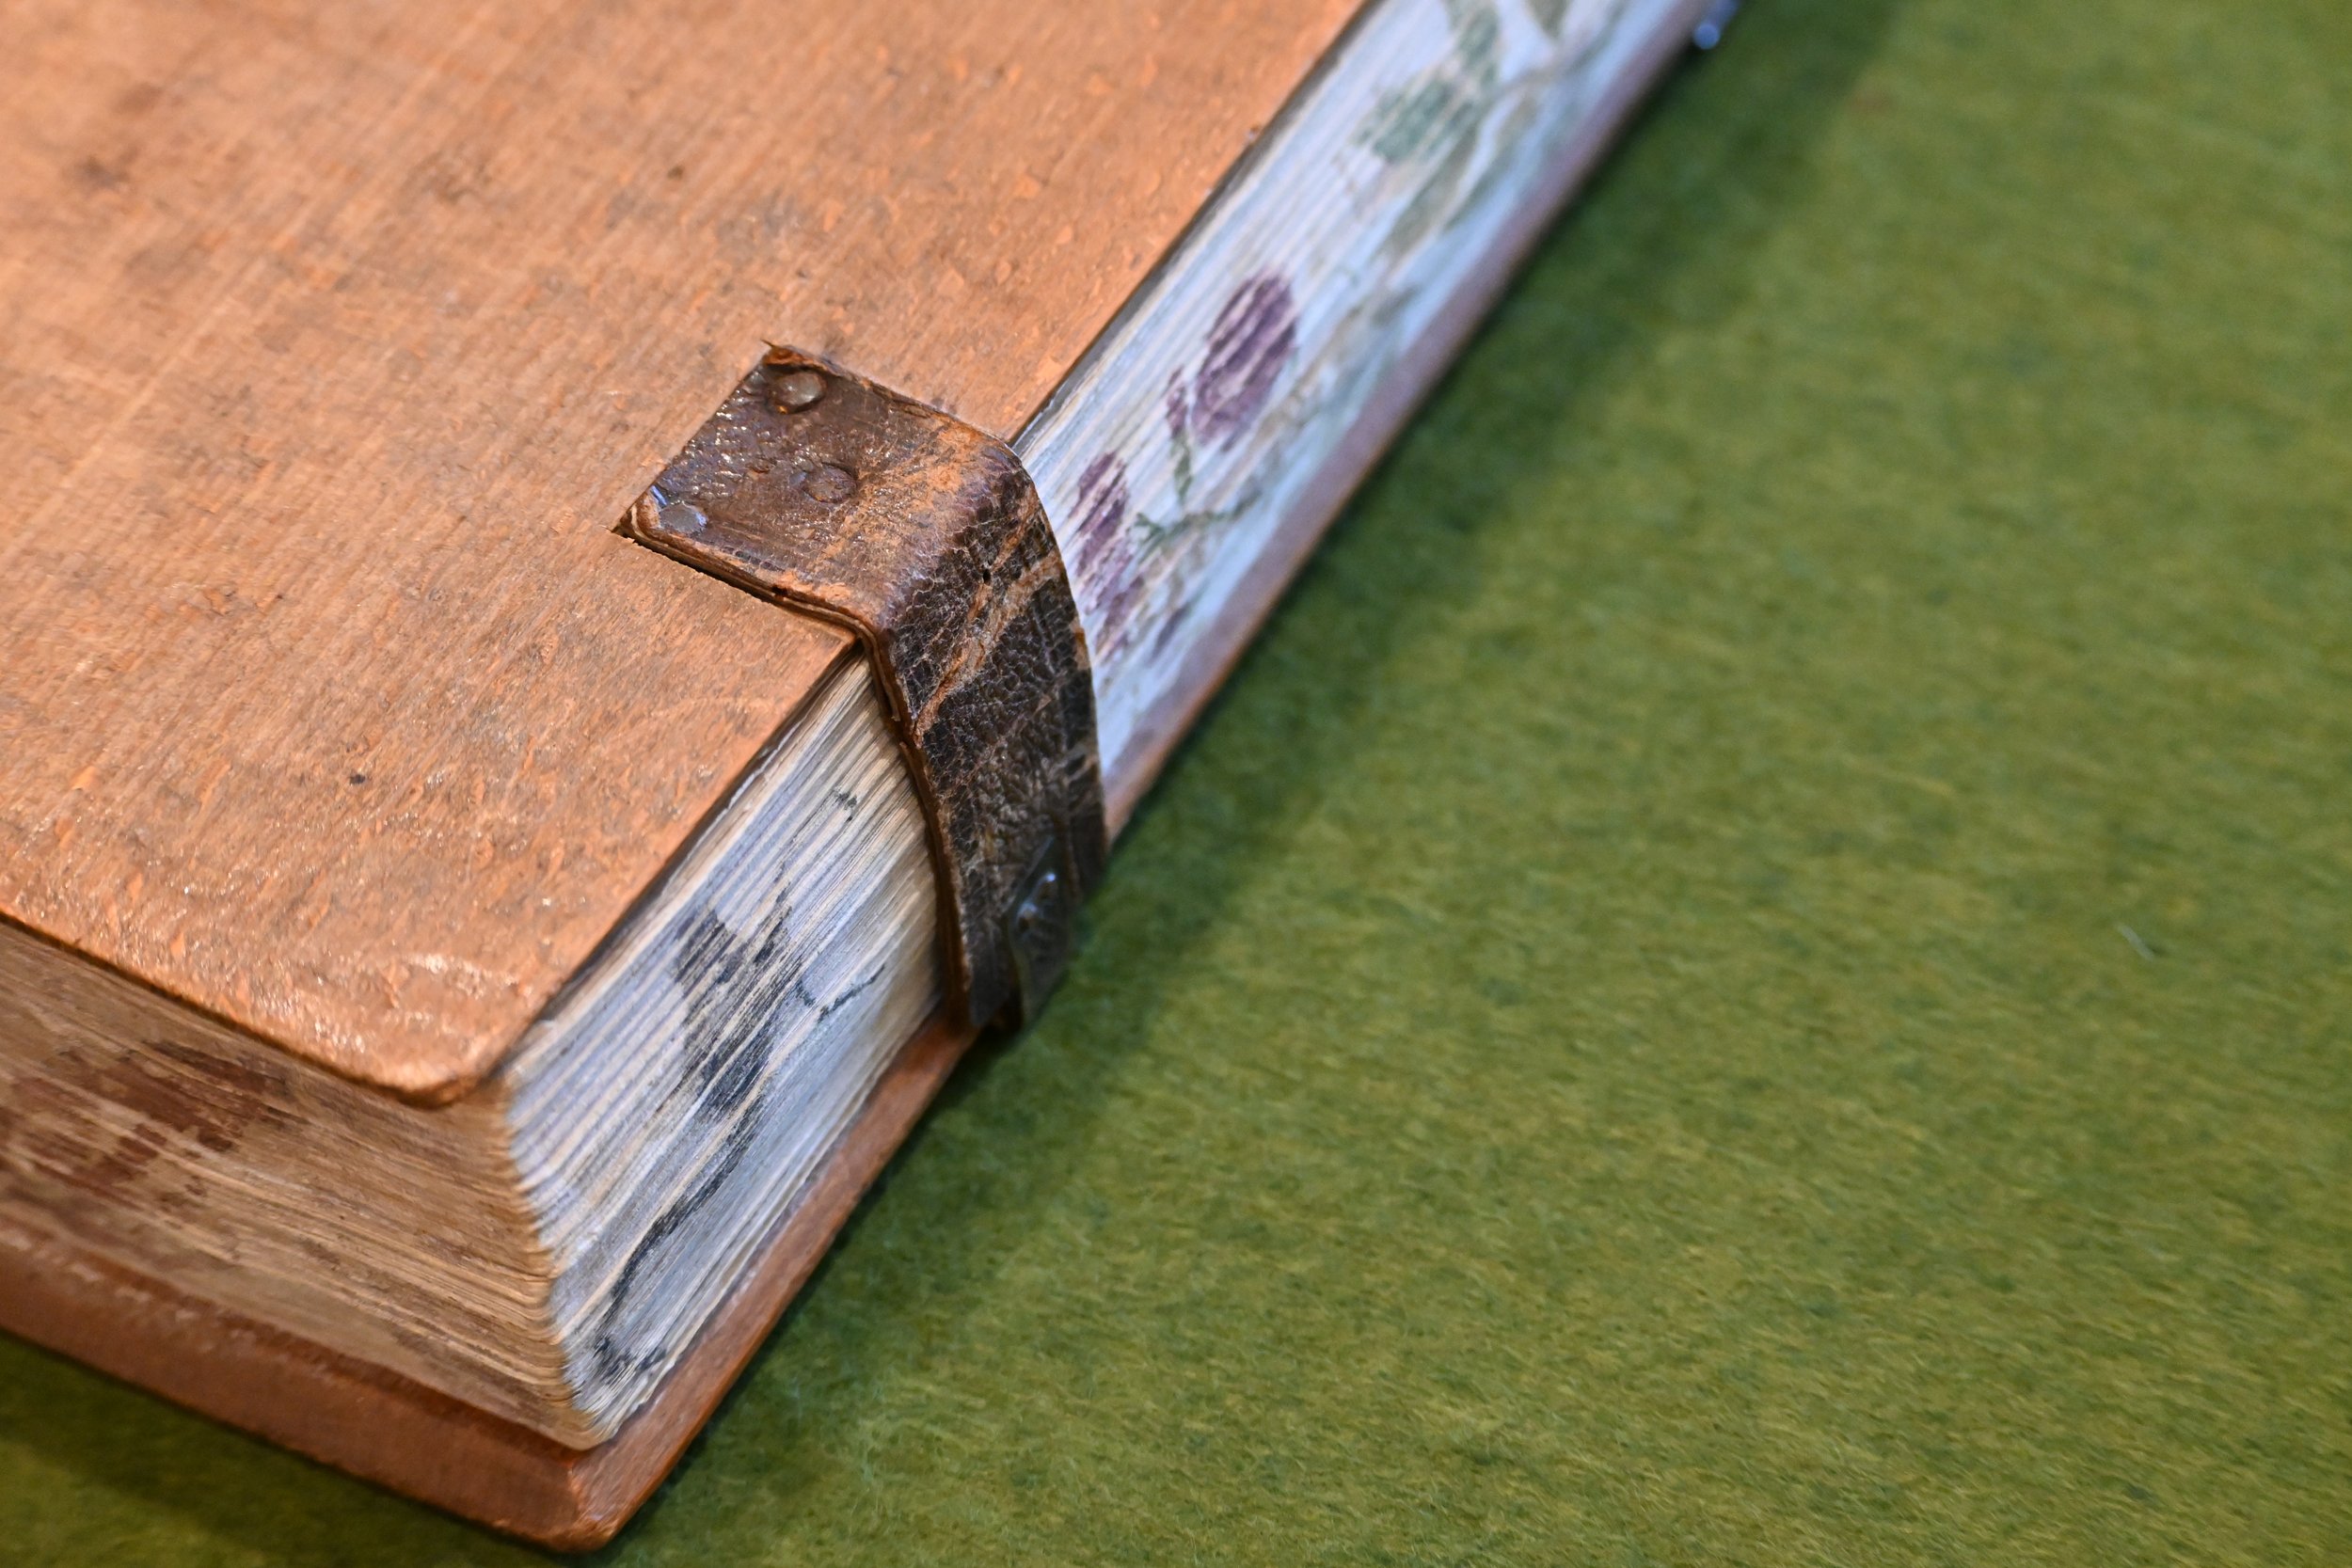  Fore edge painting of a Numidian crane, roses with leaves, and a lion by Cesare Vecellio (1521-1601), who was Titian’s nephew (Tiziano Vecellio, ca. 1488/90-1576).&nbsp; 